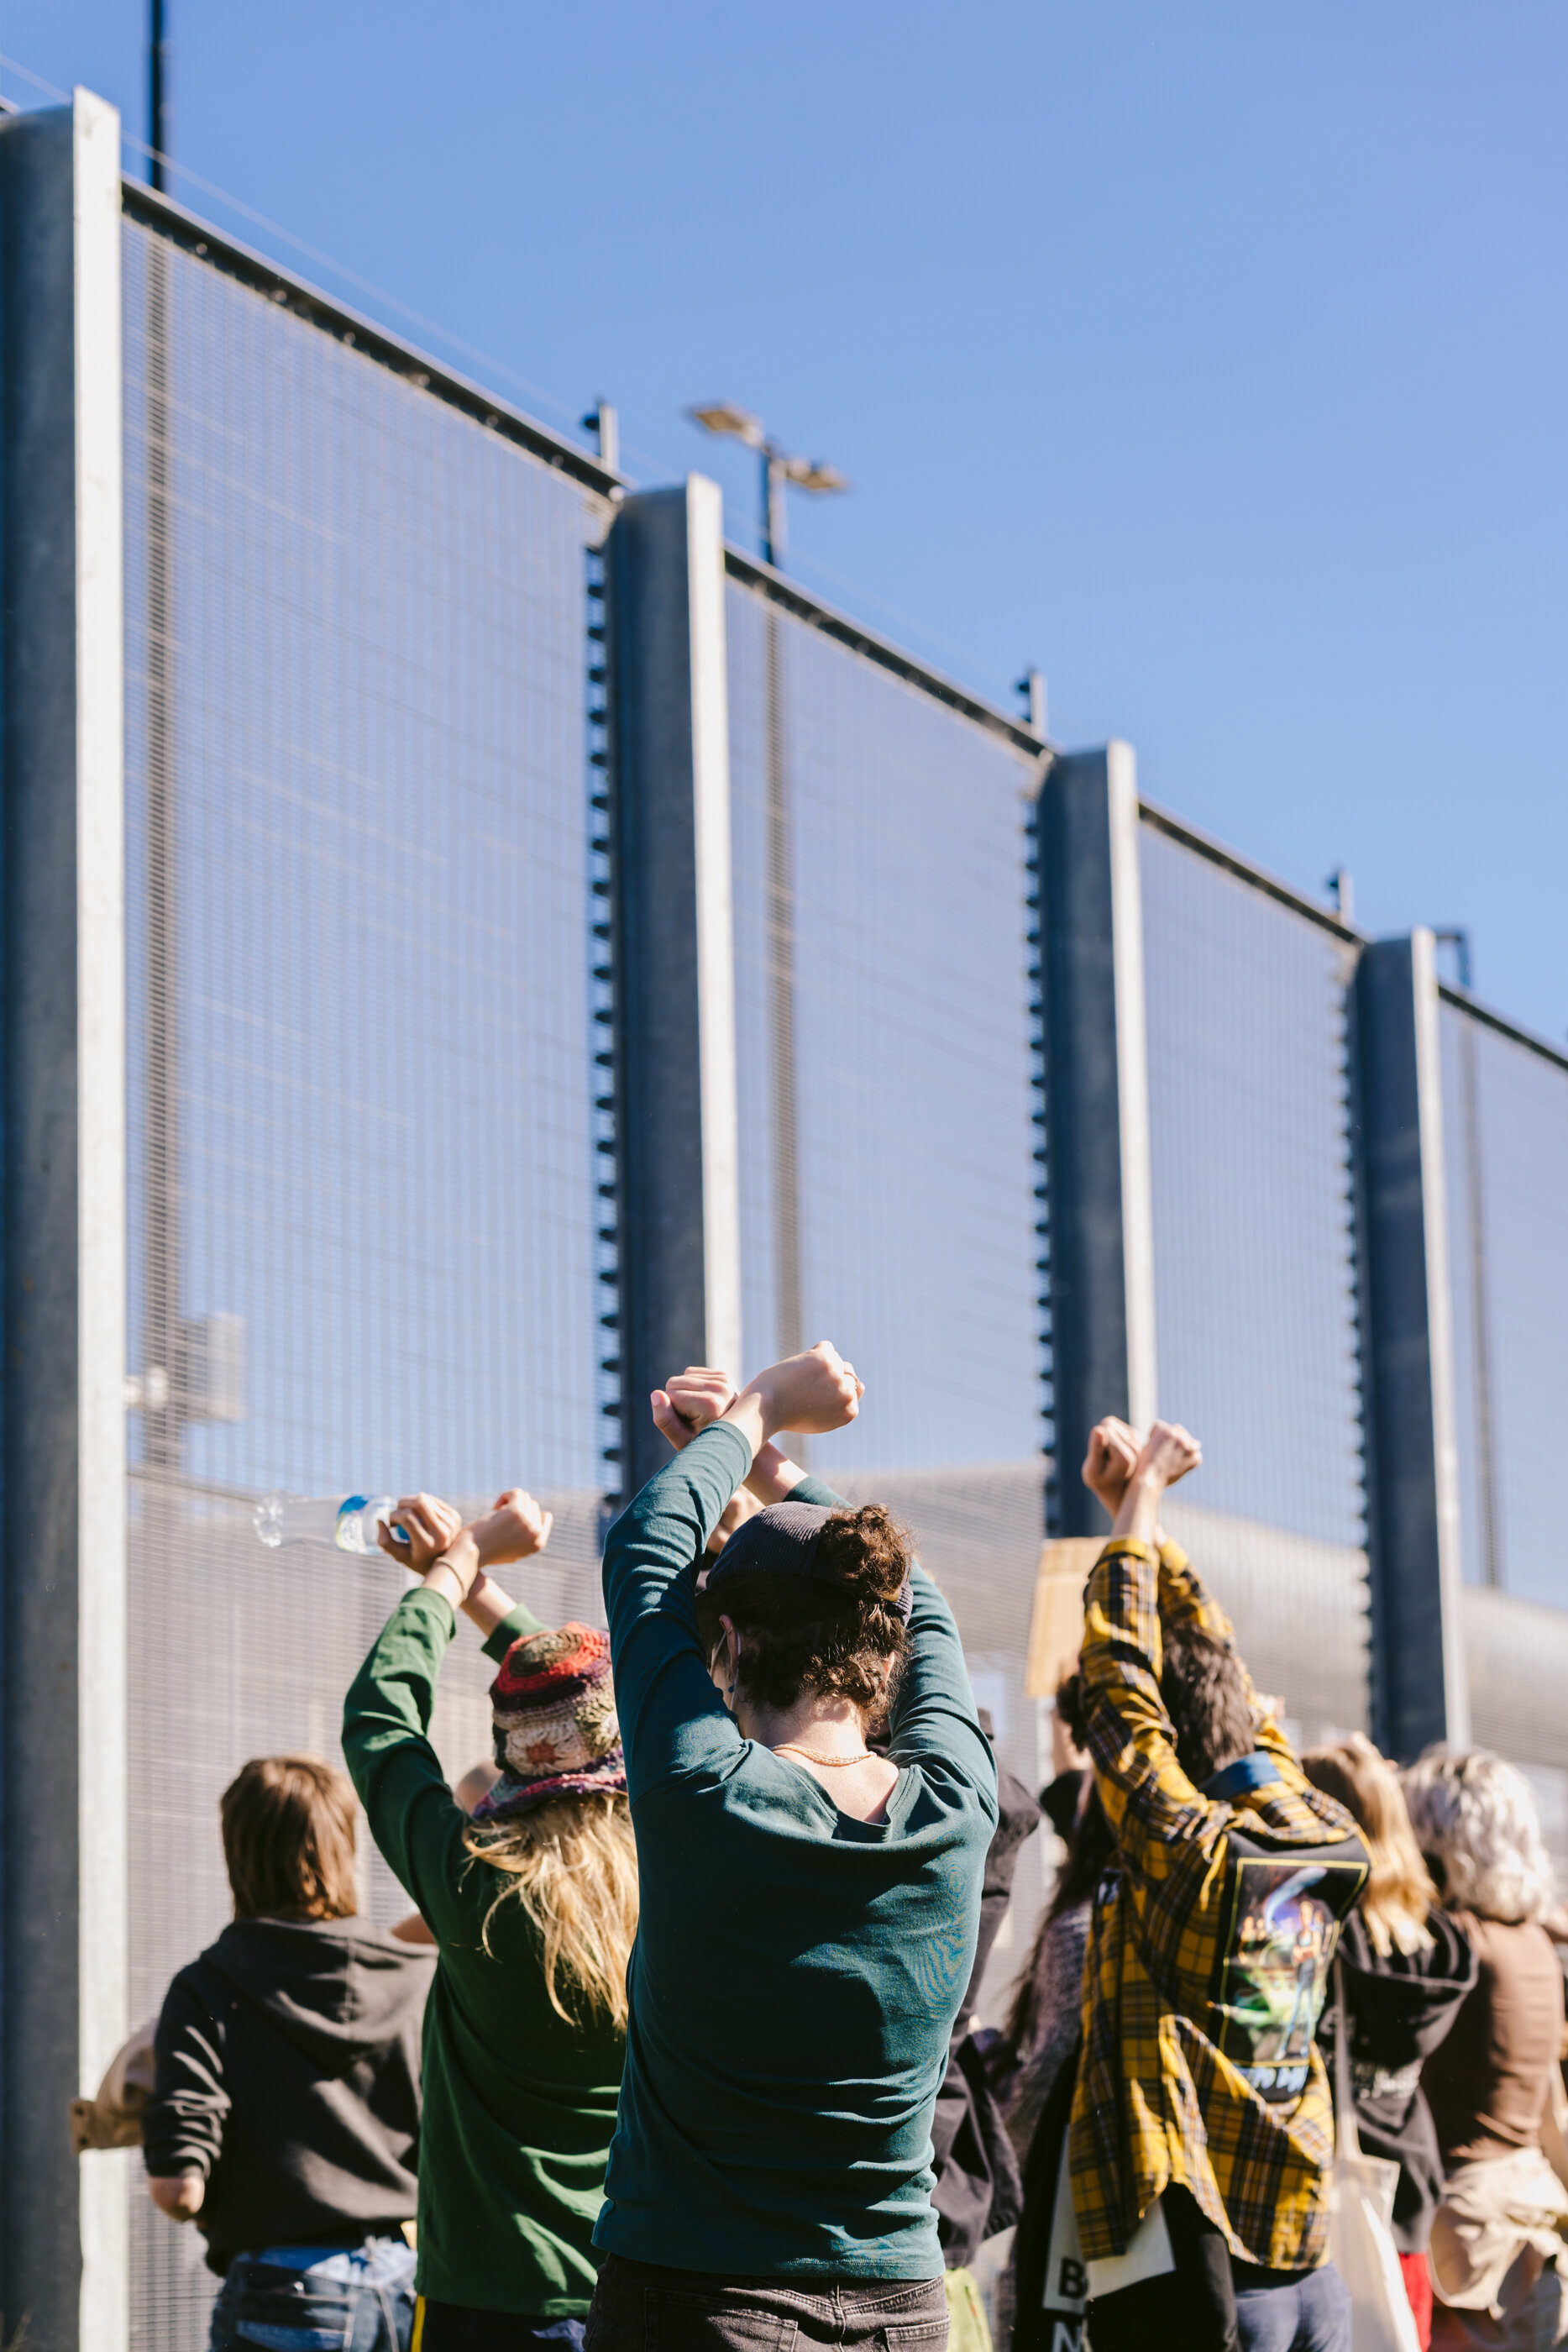  Protestors show solidarity with detainees outside the security fencing of Brisbane International Transit Accomodation (BITA)  